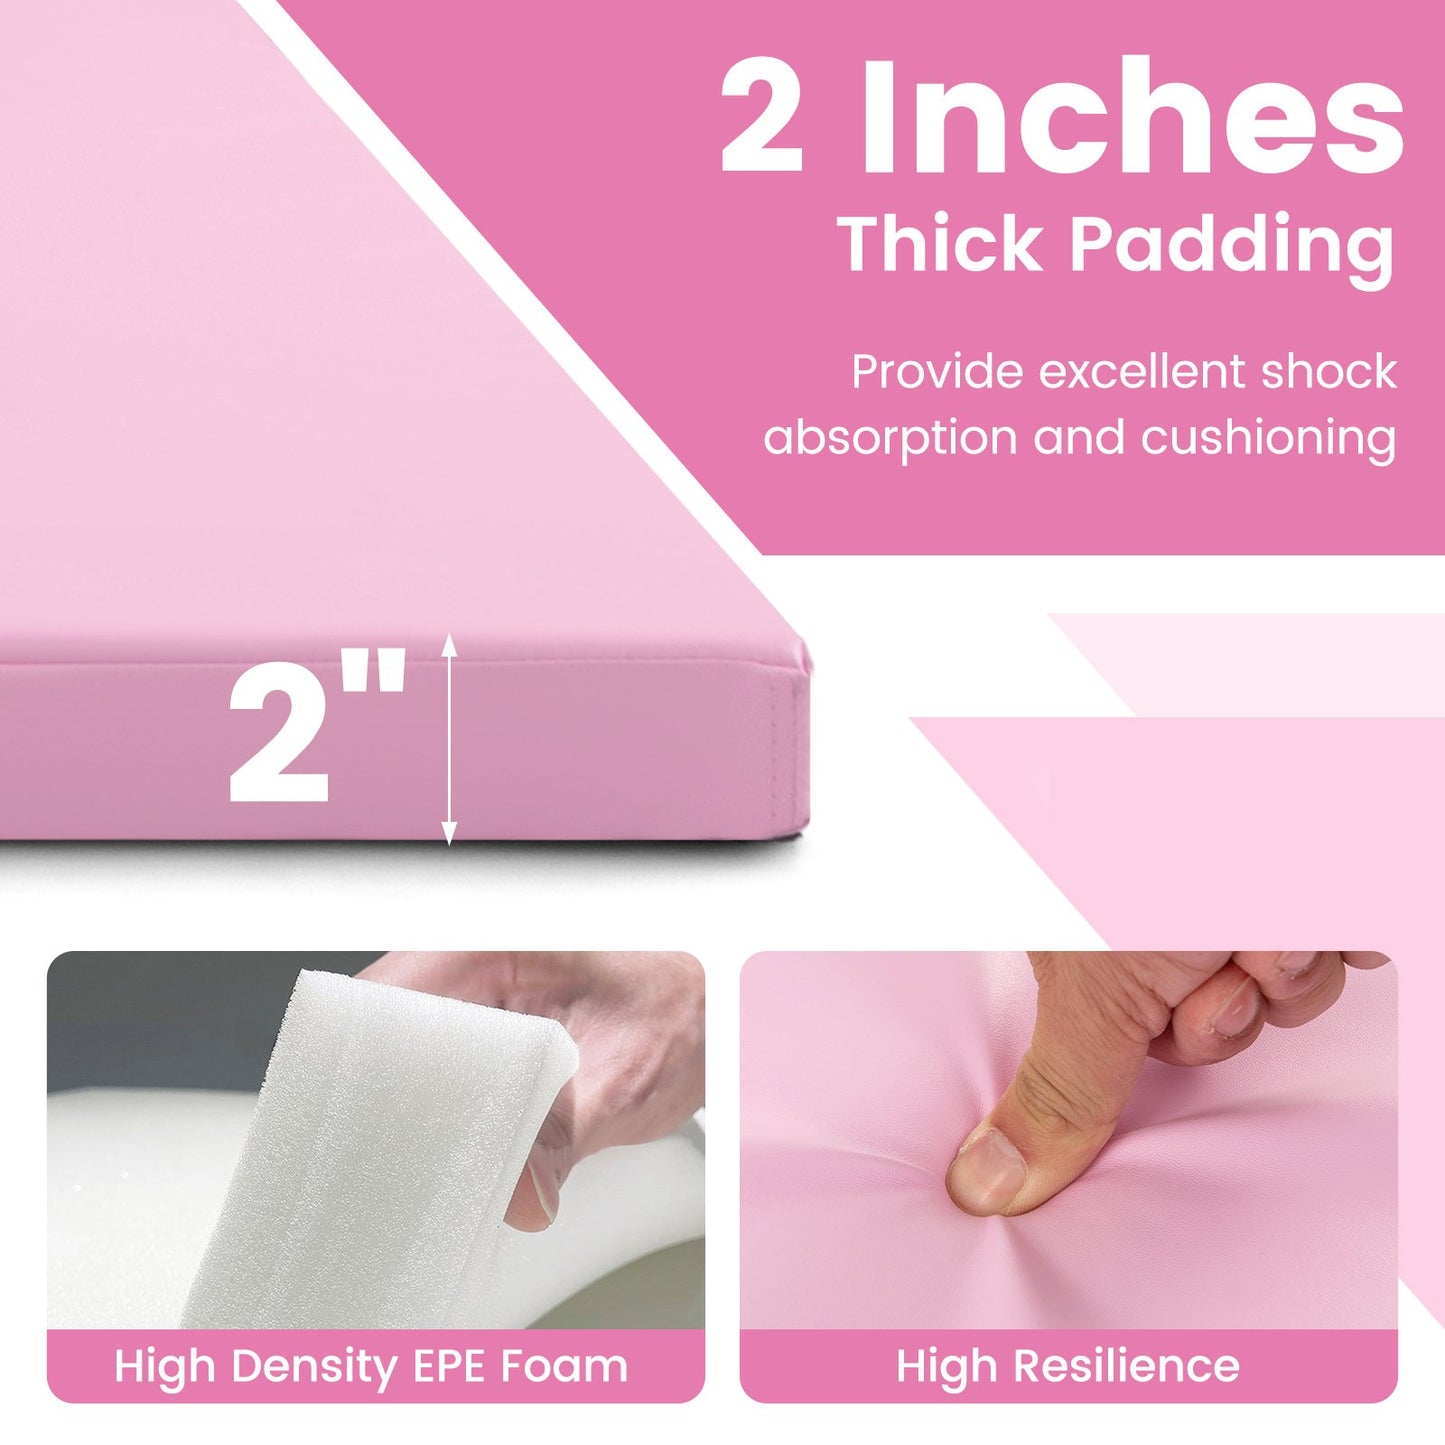 4-Panel PU Leather Folding Exercise Mat with Carrying Handles, Pink